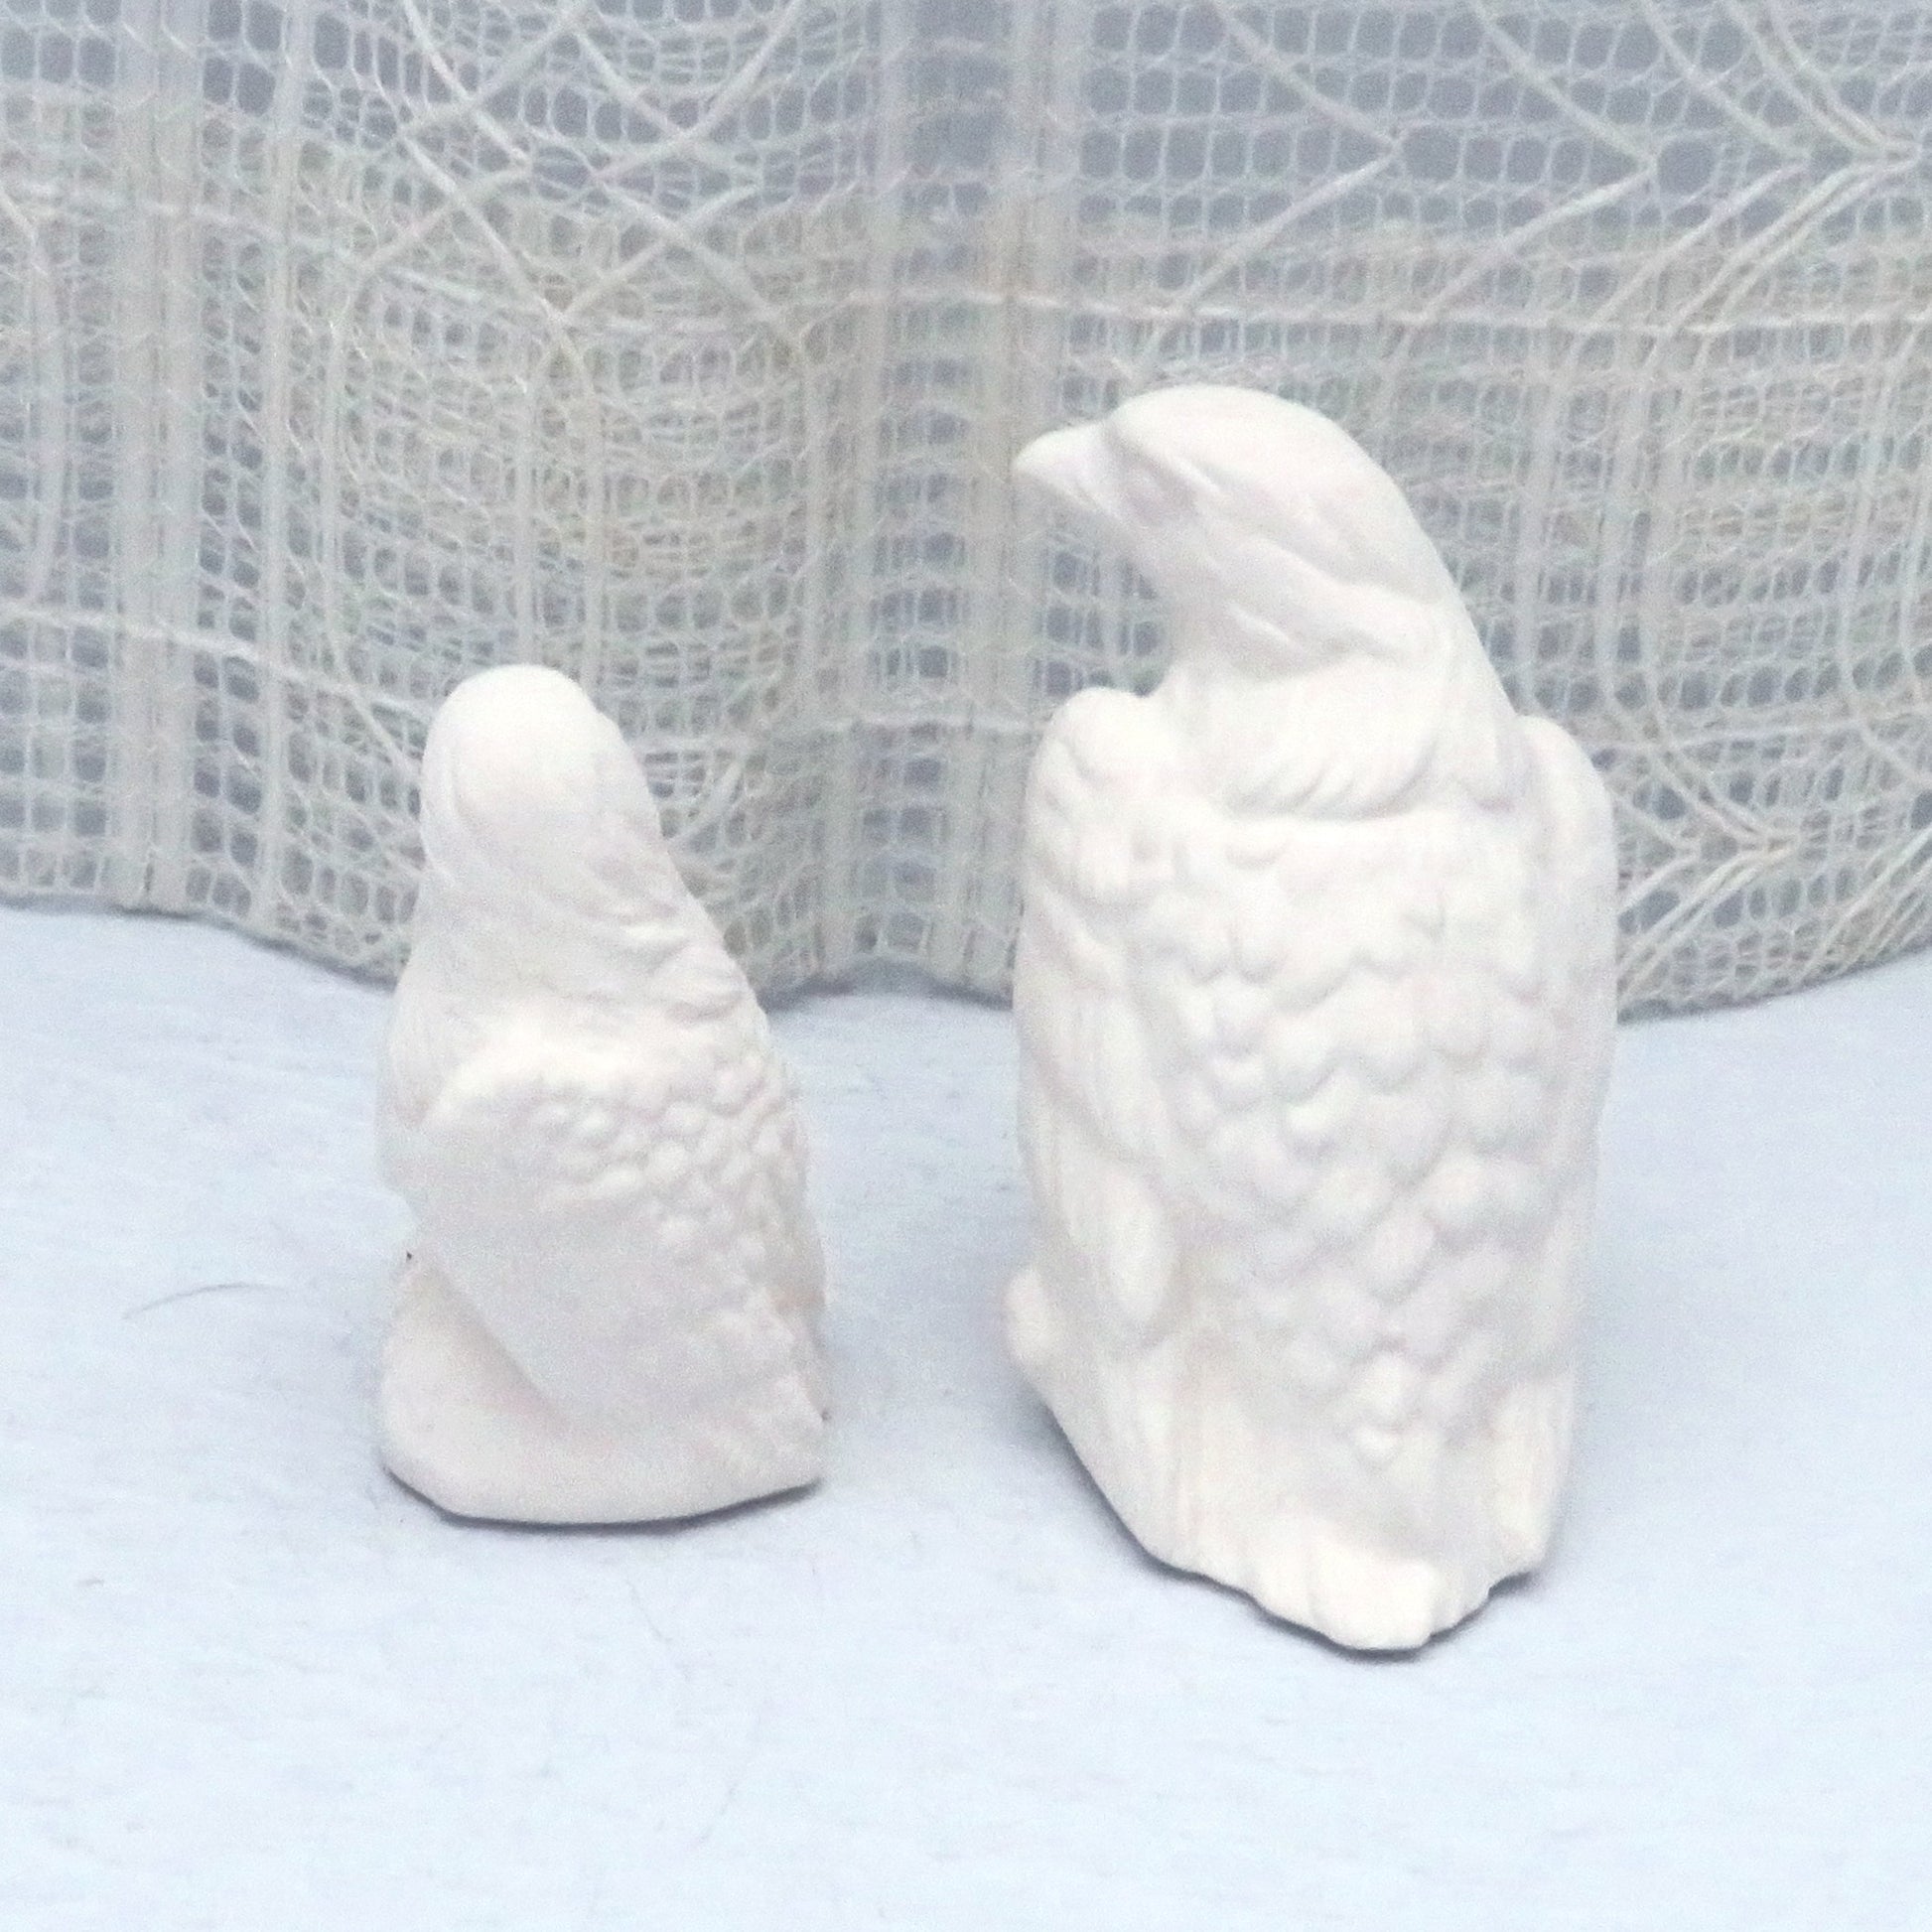 Rear view of ready to paint ceramic eagle figurines ona pale blue table and an ecru lacy curtain.